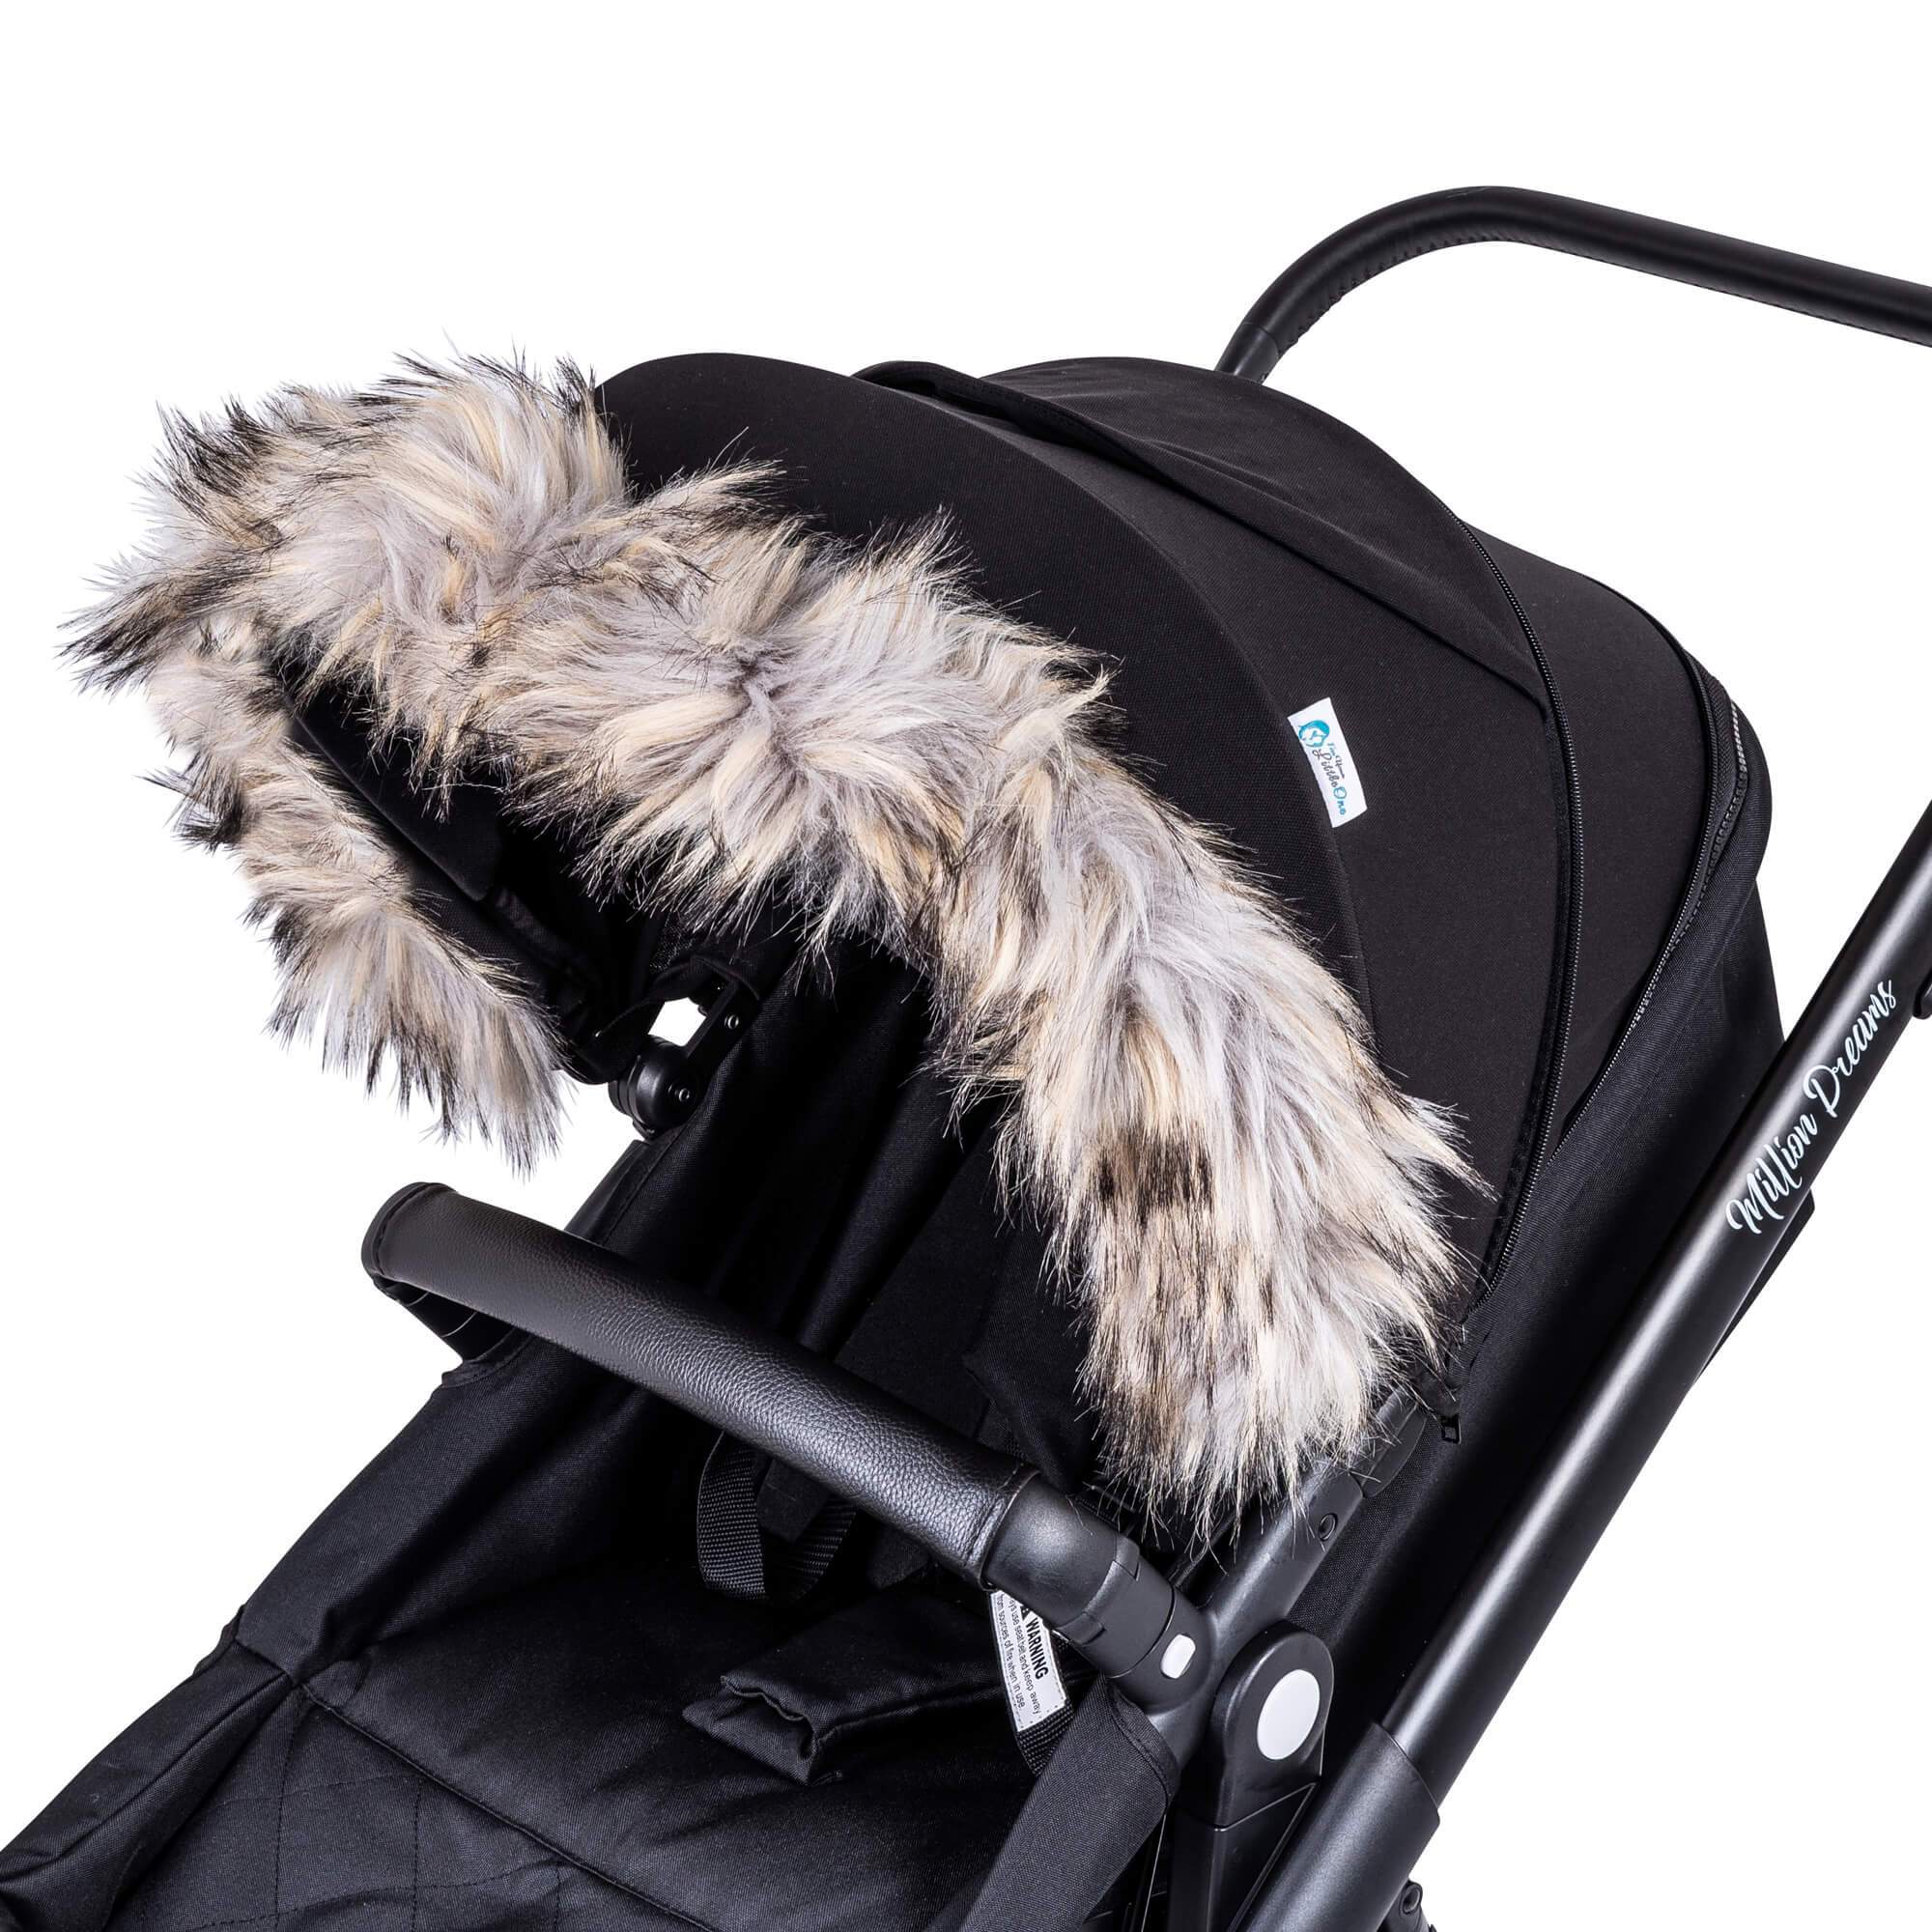 Pram Fur Hood Trim Attachment for Pushchair Compatible with Brio - For Your Little One